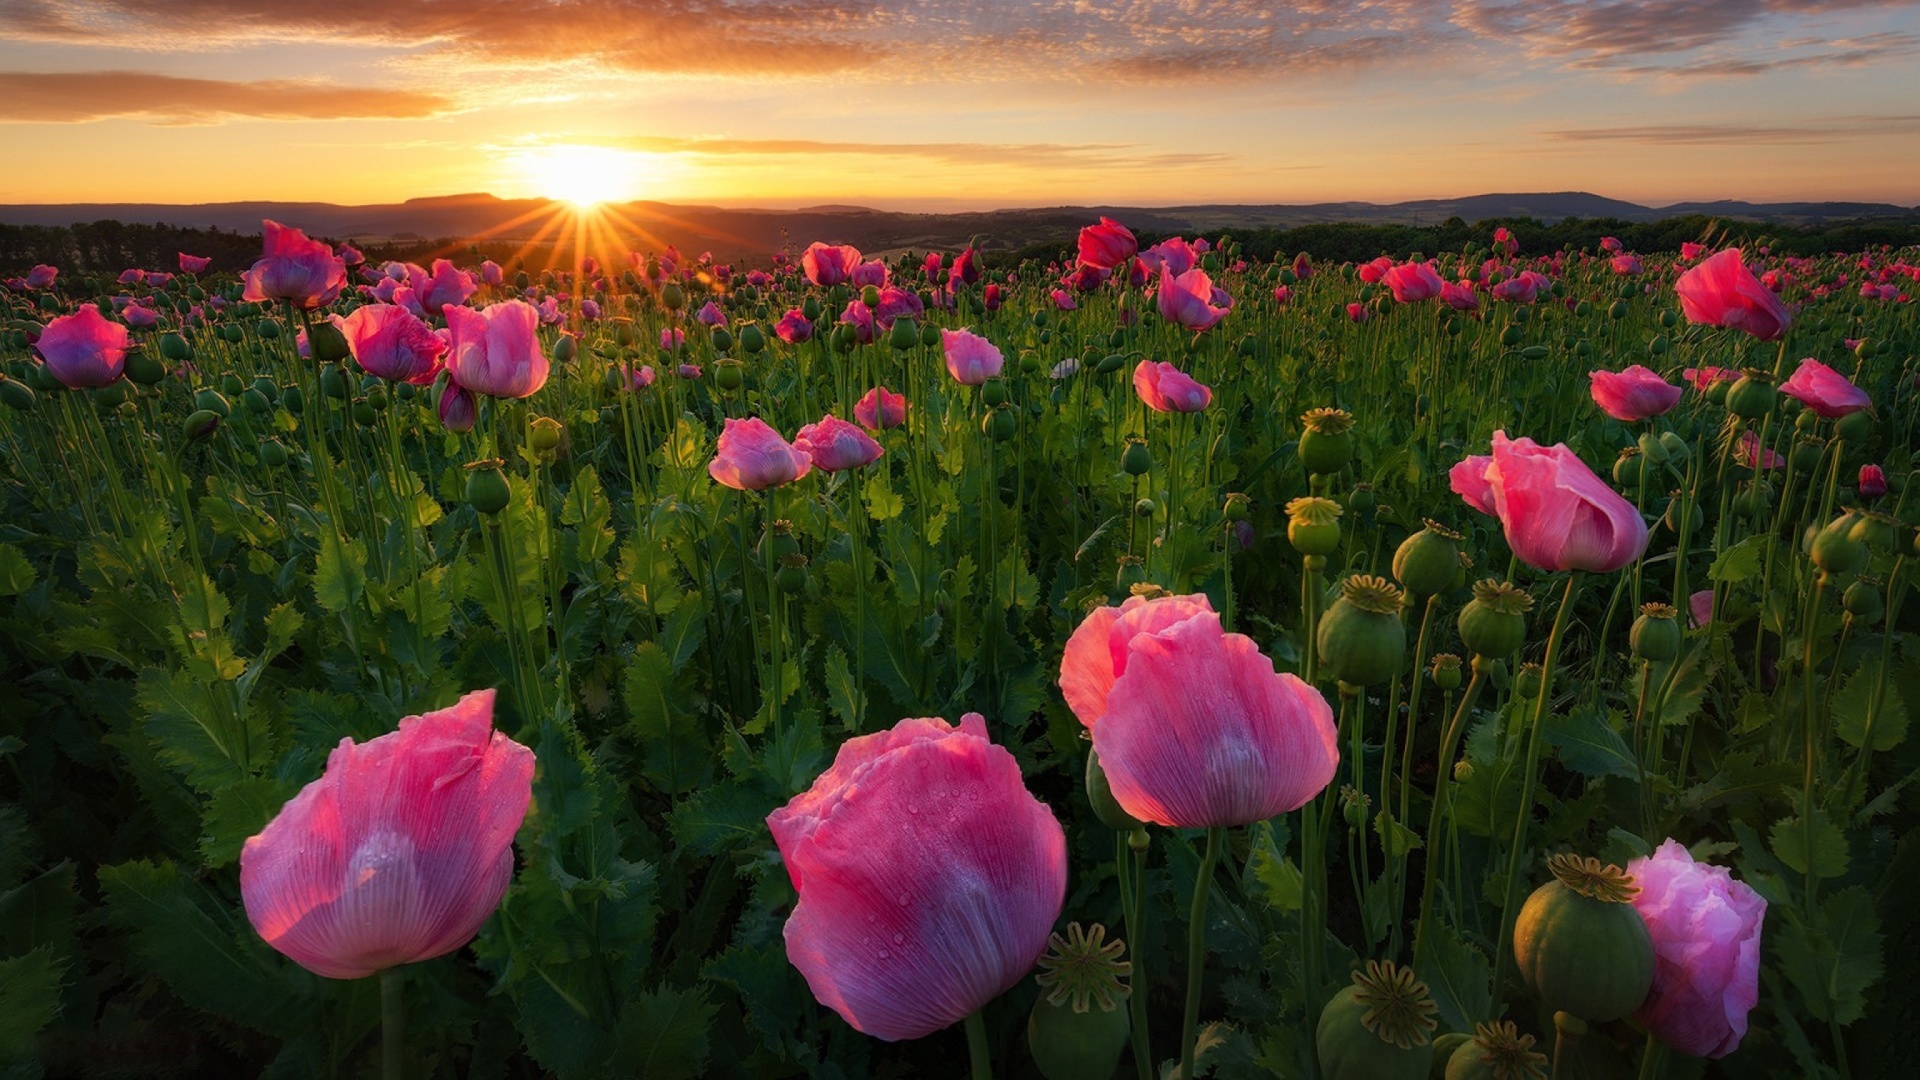 Das Poppies in Thuringia, Germany Wallpaper 1920x1080